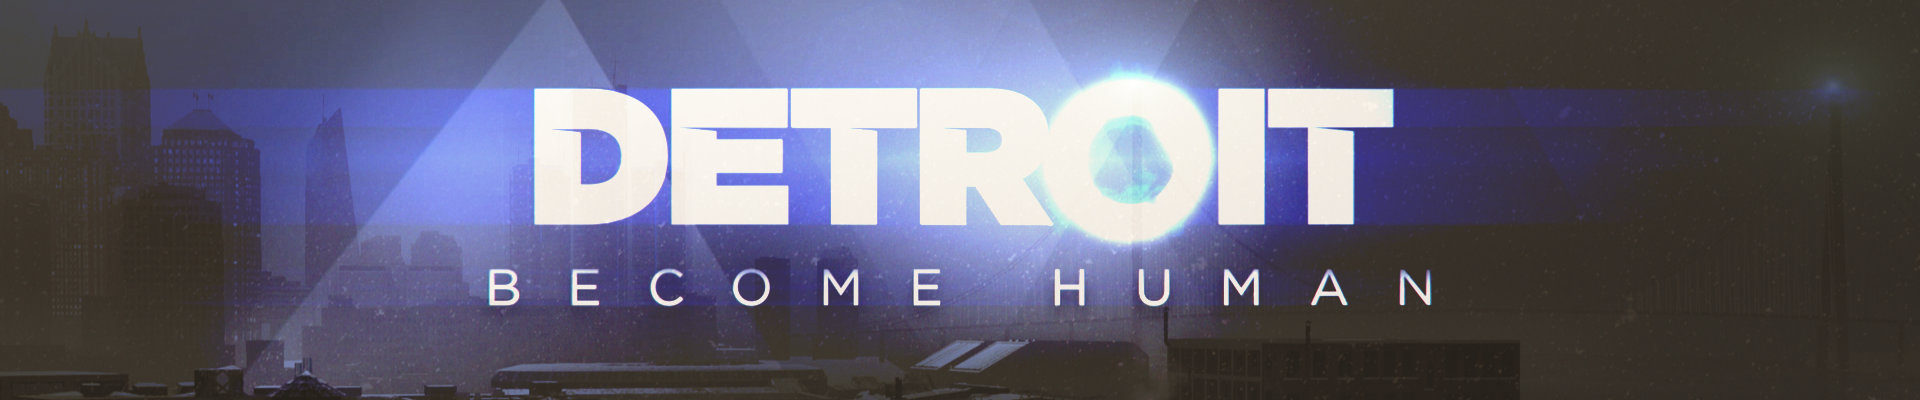 Thoughts on: Detroit: Become Human